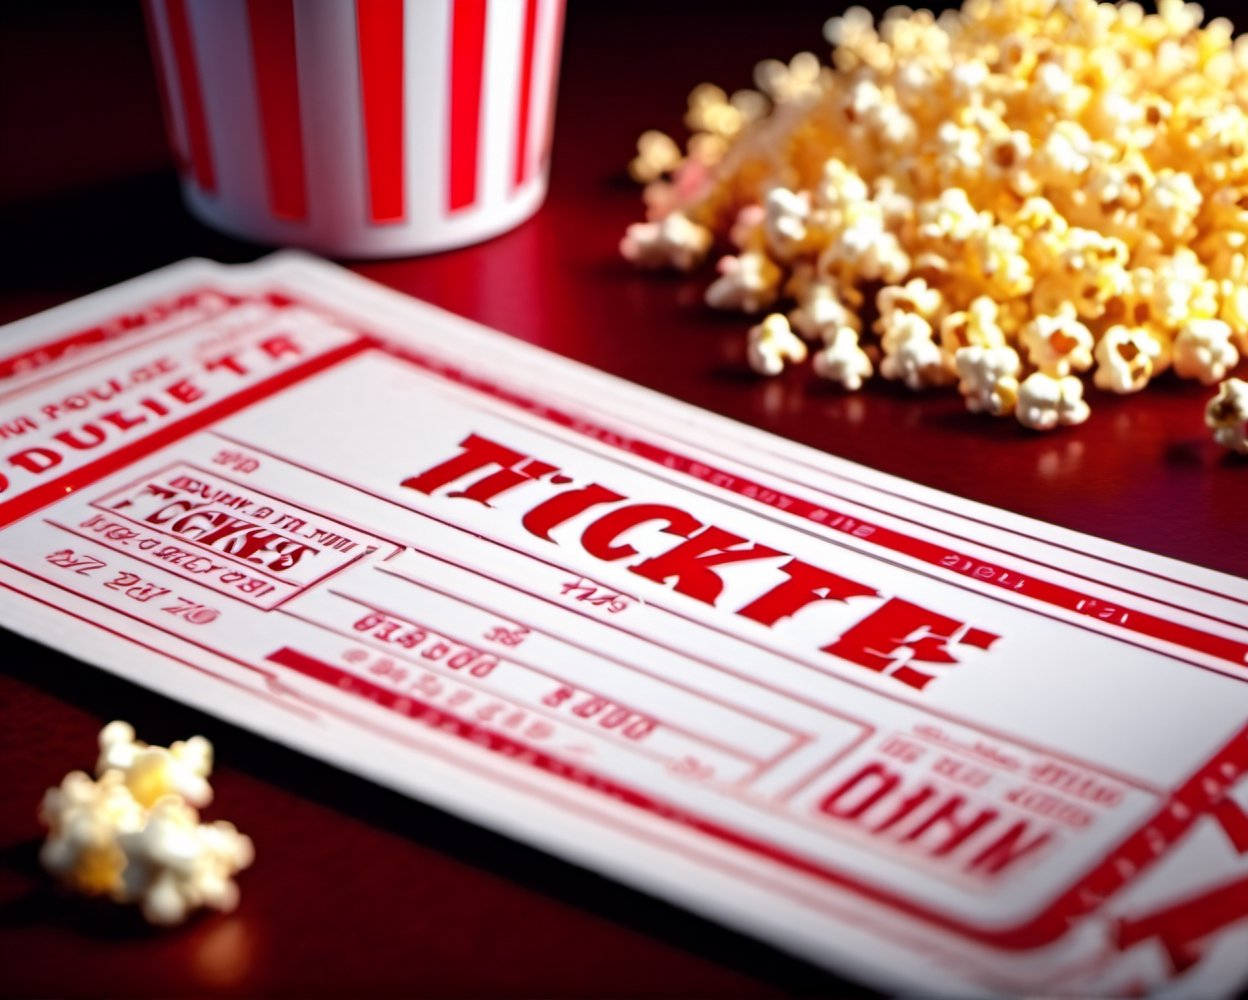 An extremely detailed, hyper-realistic, high-resolution cinematic still of a double movie tickets on table with popcorn, soda, 